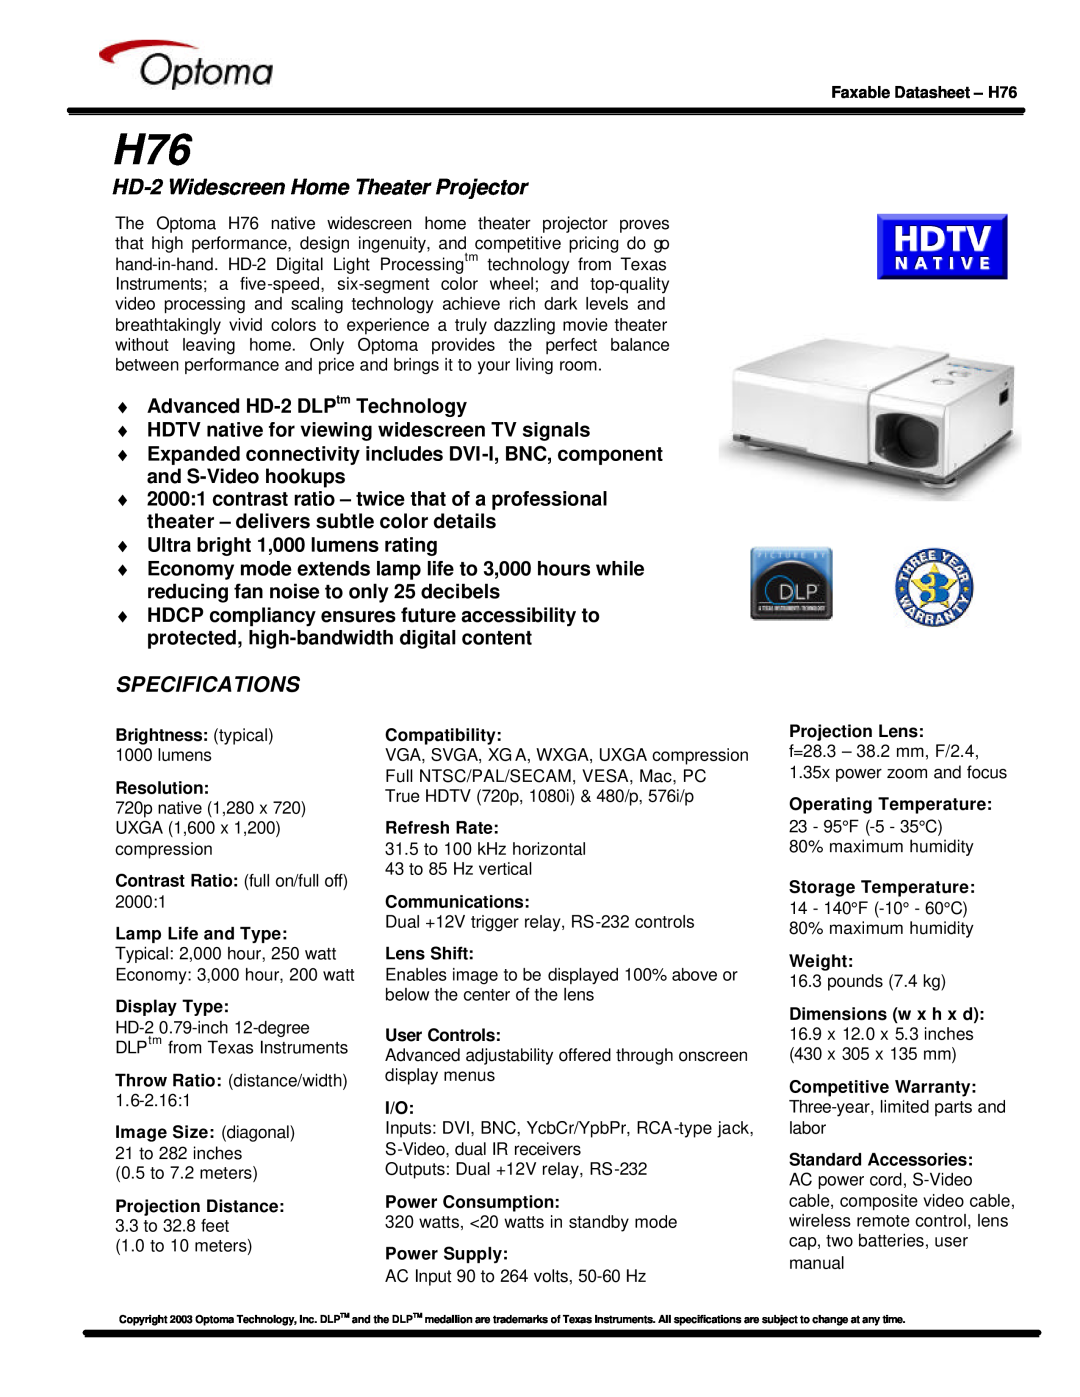 Optoma Technology H76 specifications HD-2 Widescreen Home Theater Projector, Specifications 